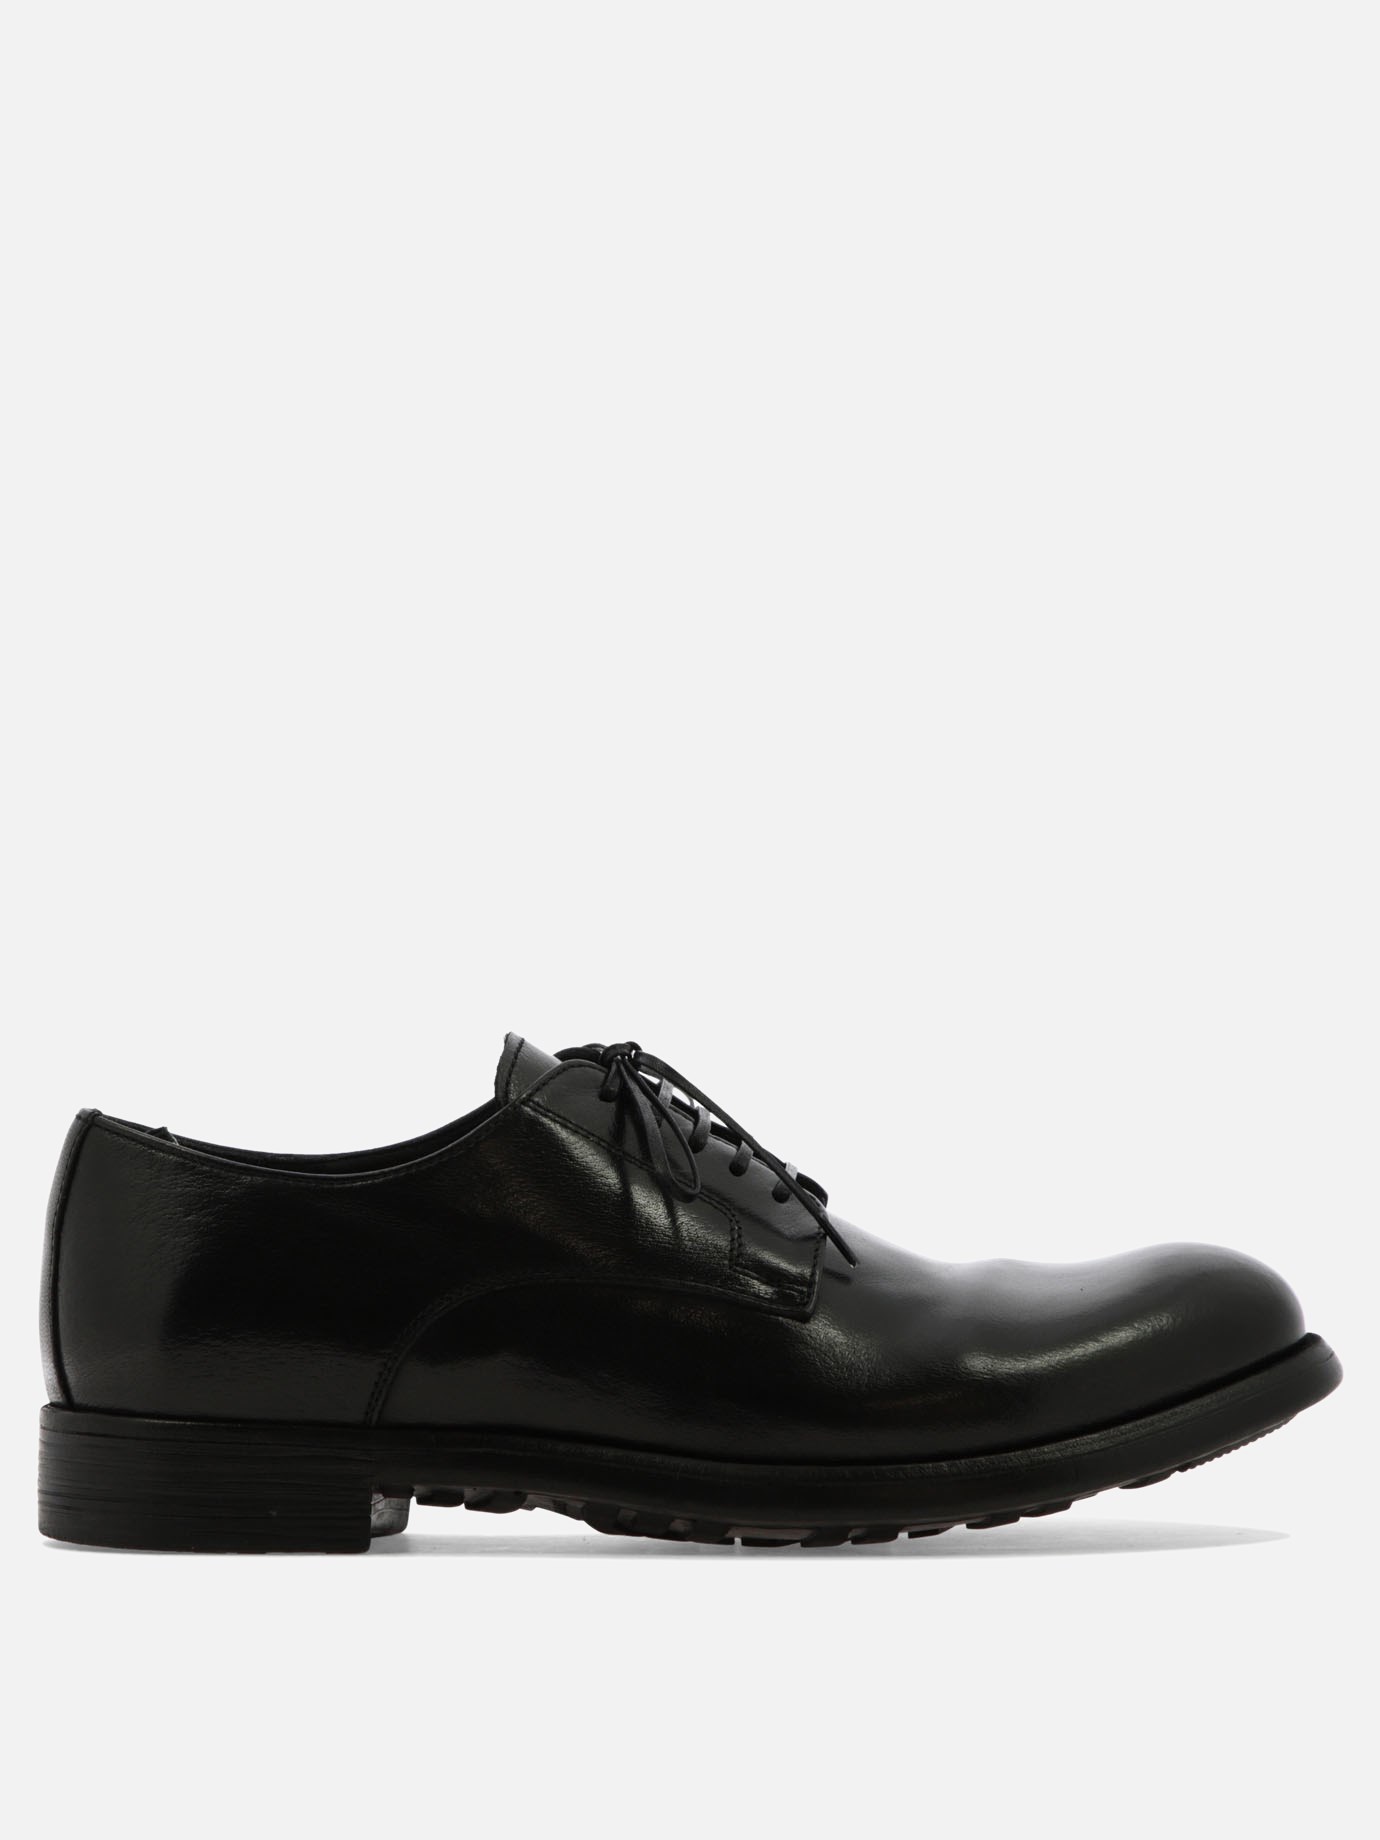  Chronicle  lace-up shoesby Officine Creative - 0